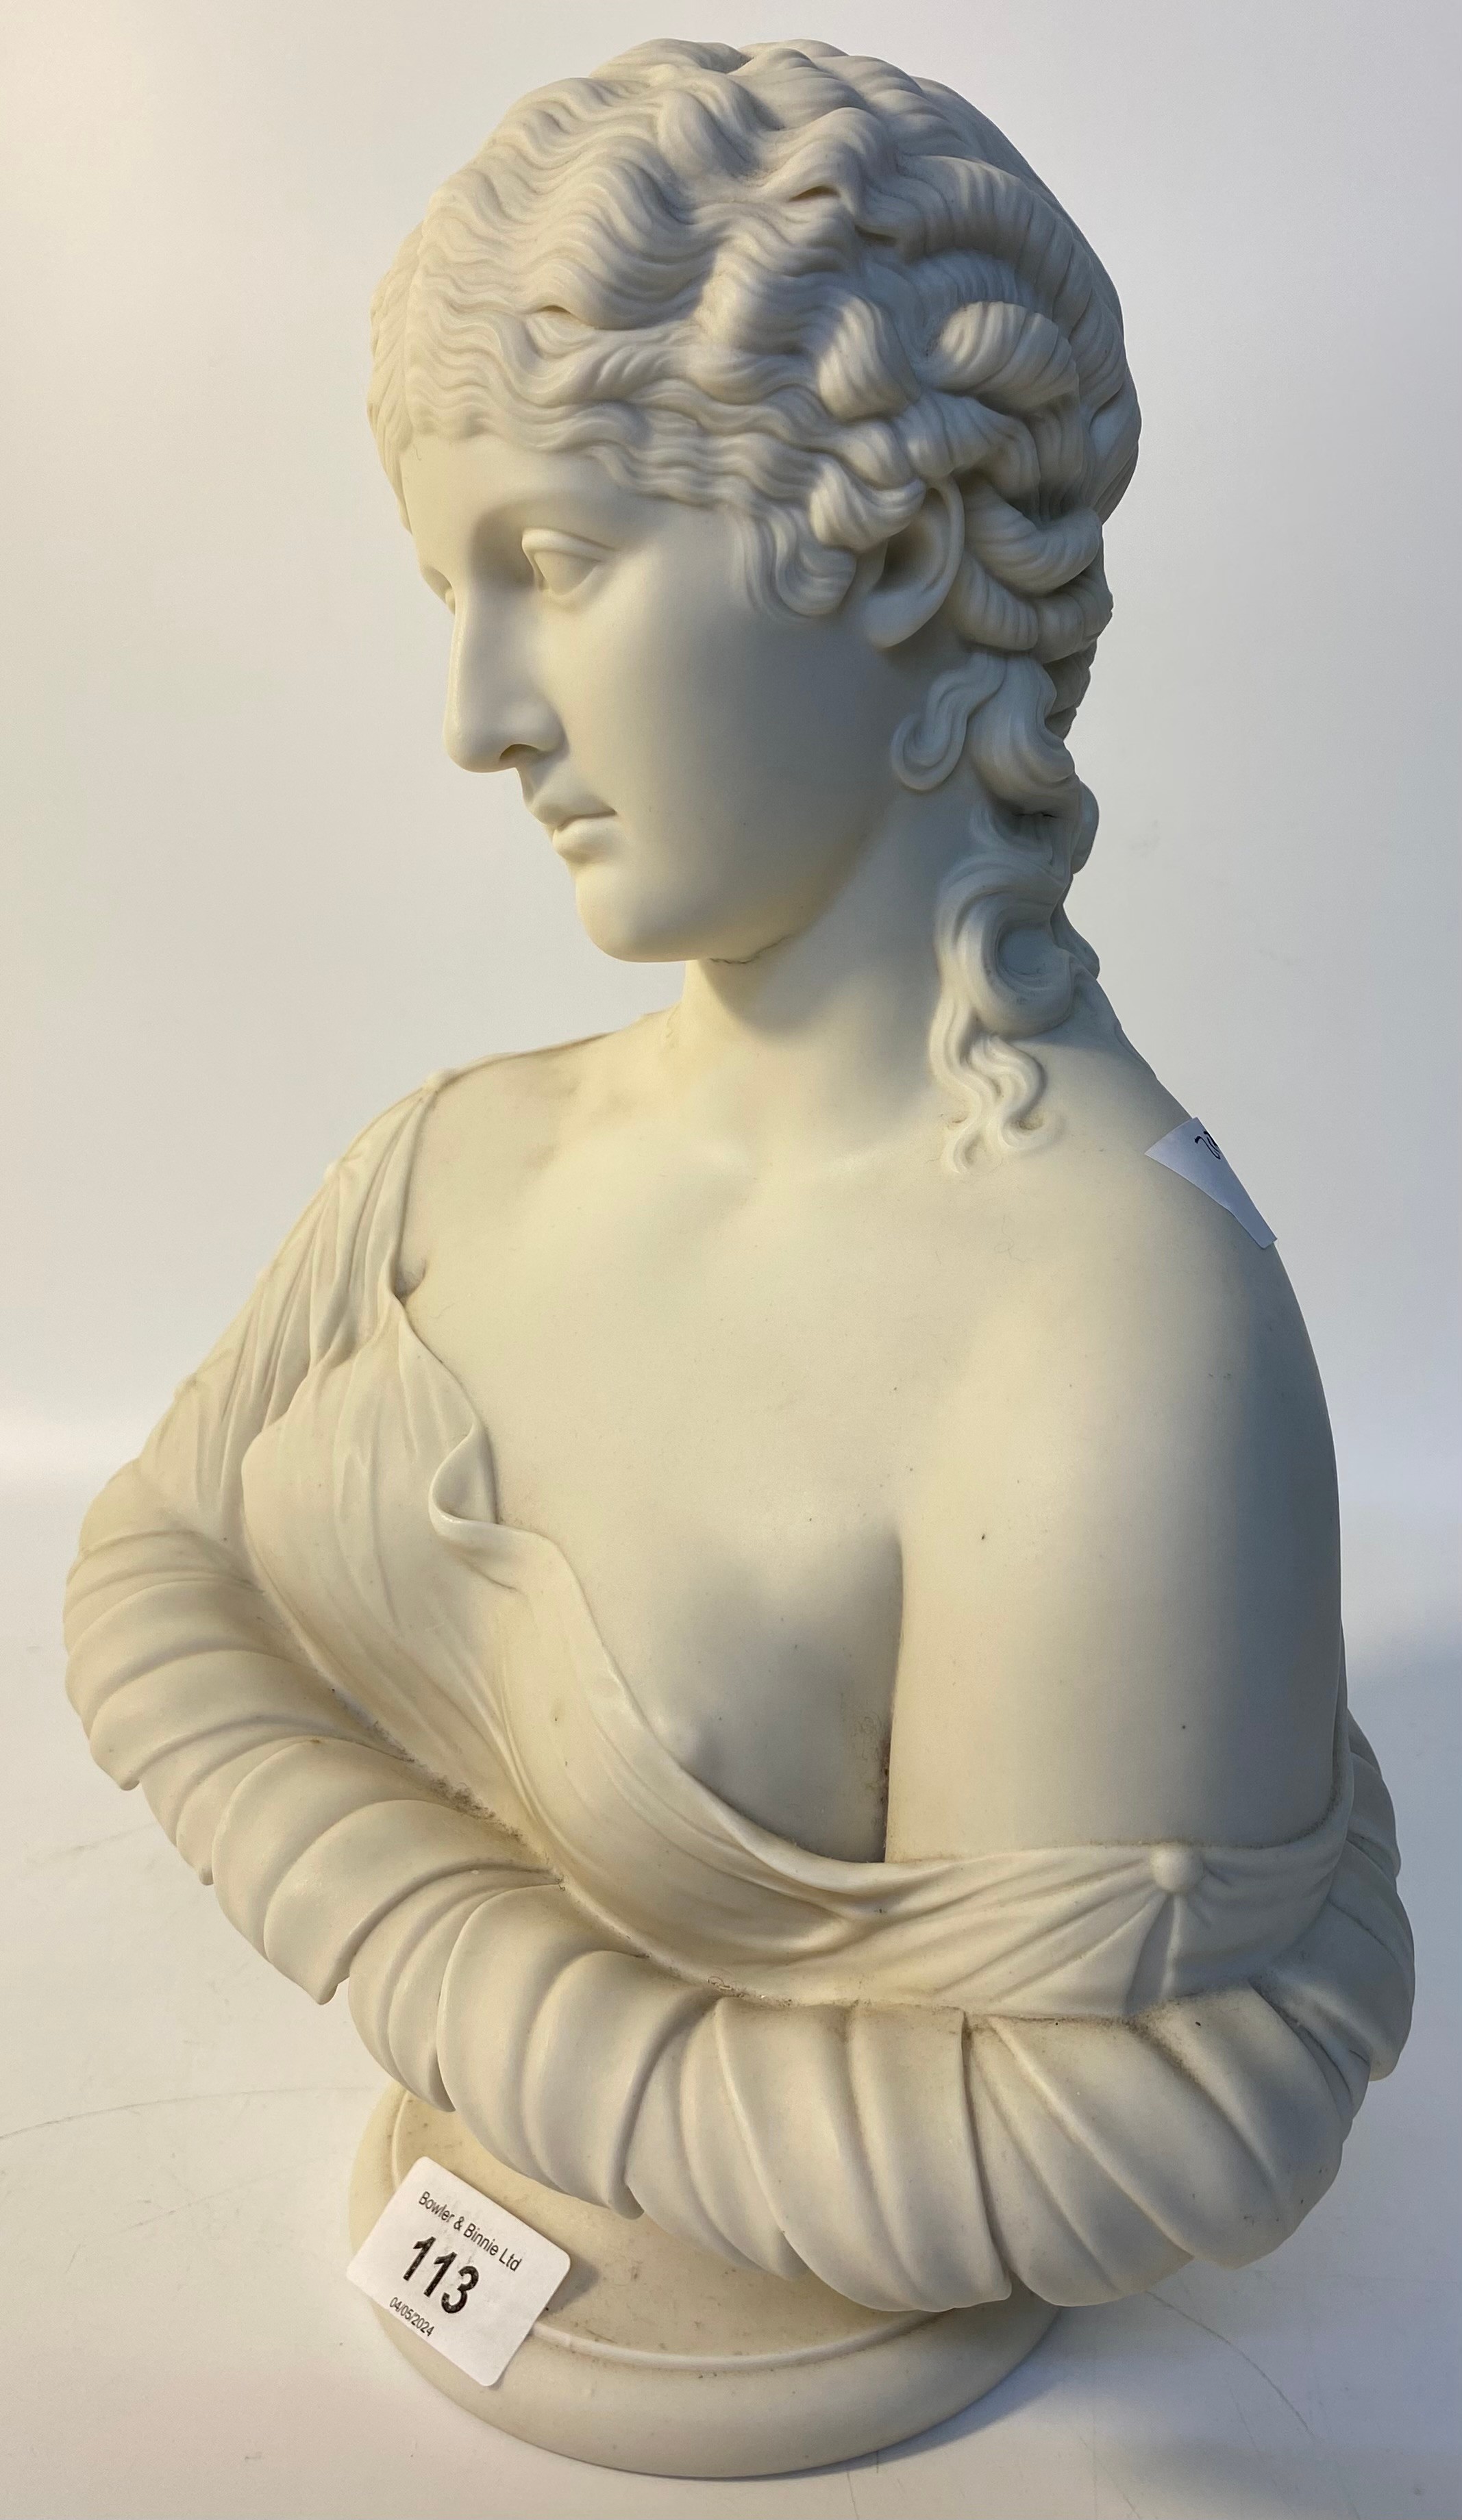 Parian Ware Bust Of Clytie Sculpted By C. Delpech [24x33cm] - Image 3 of 5